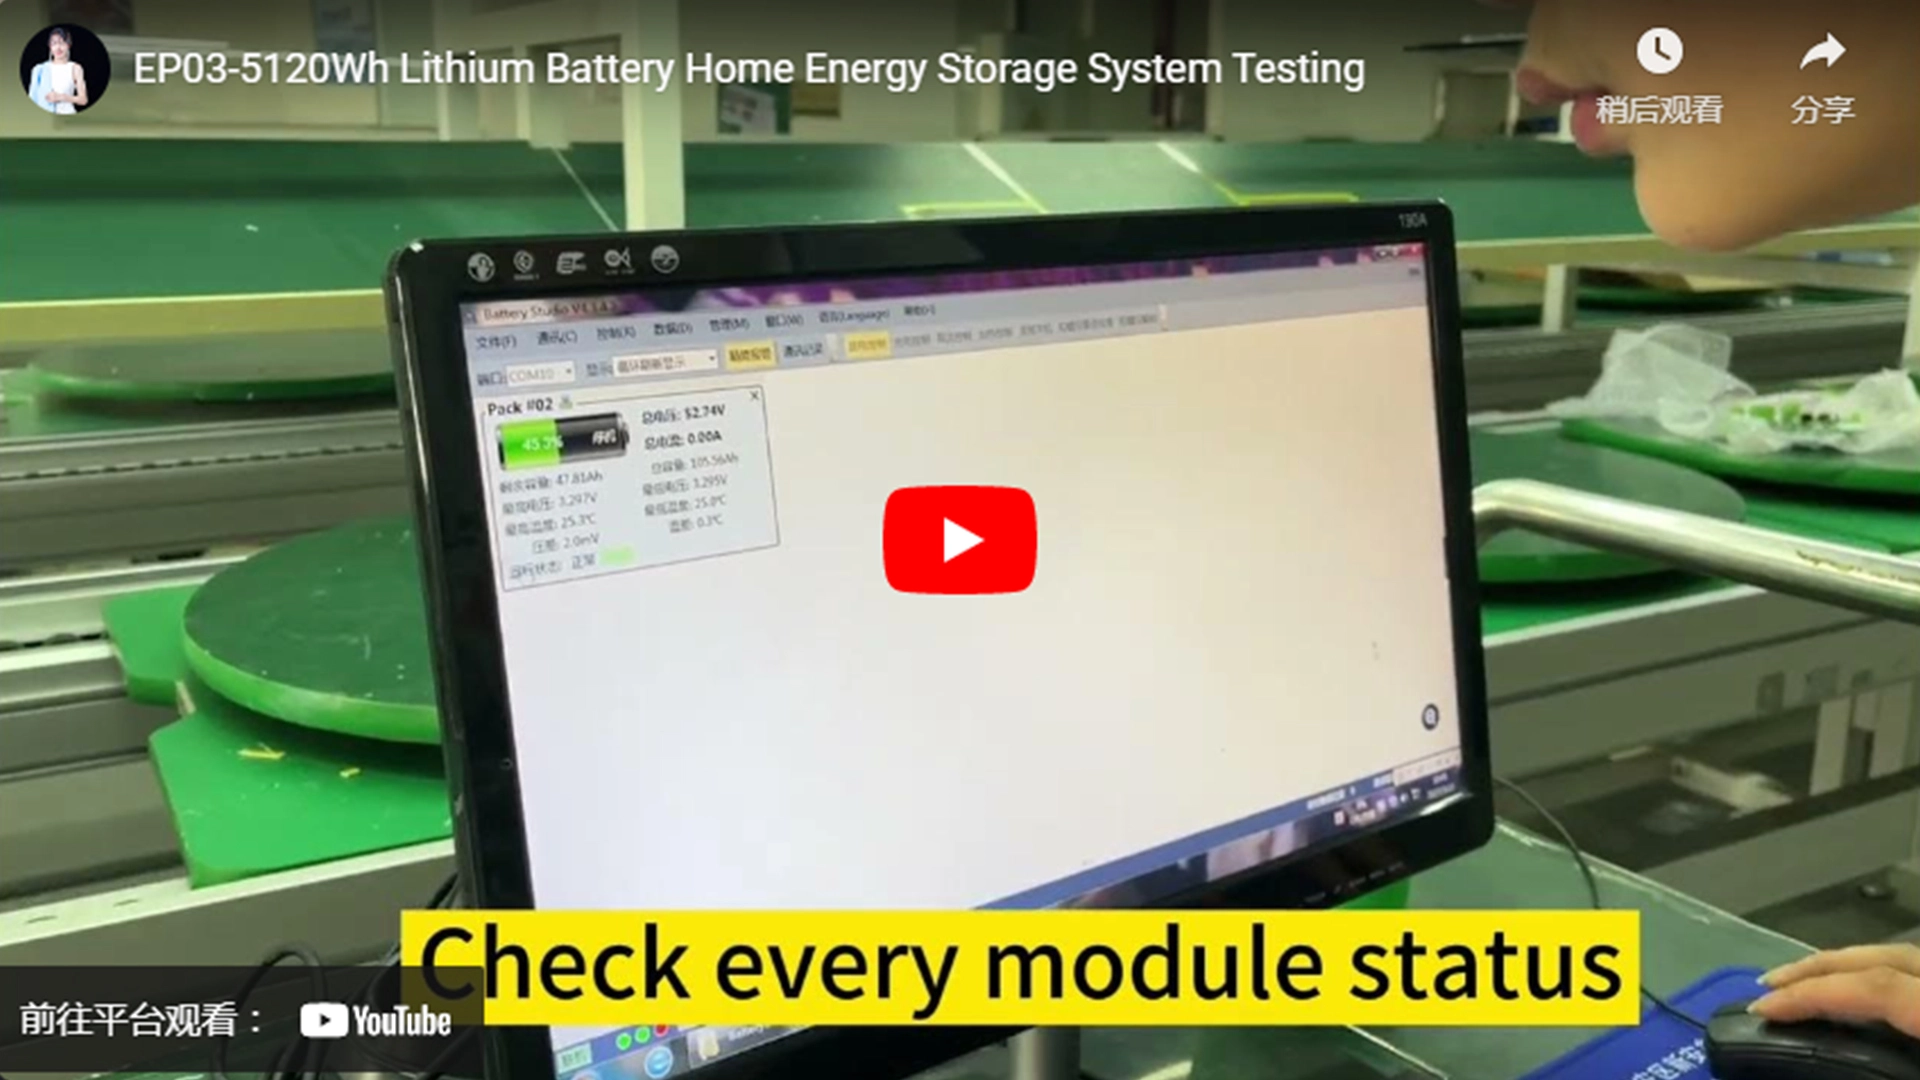 EP03-5120Wh Lithium Battery Home Energy Storage System Testing